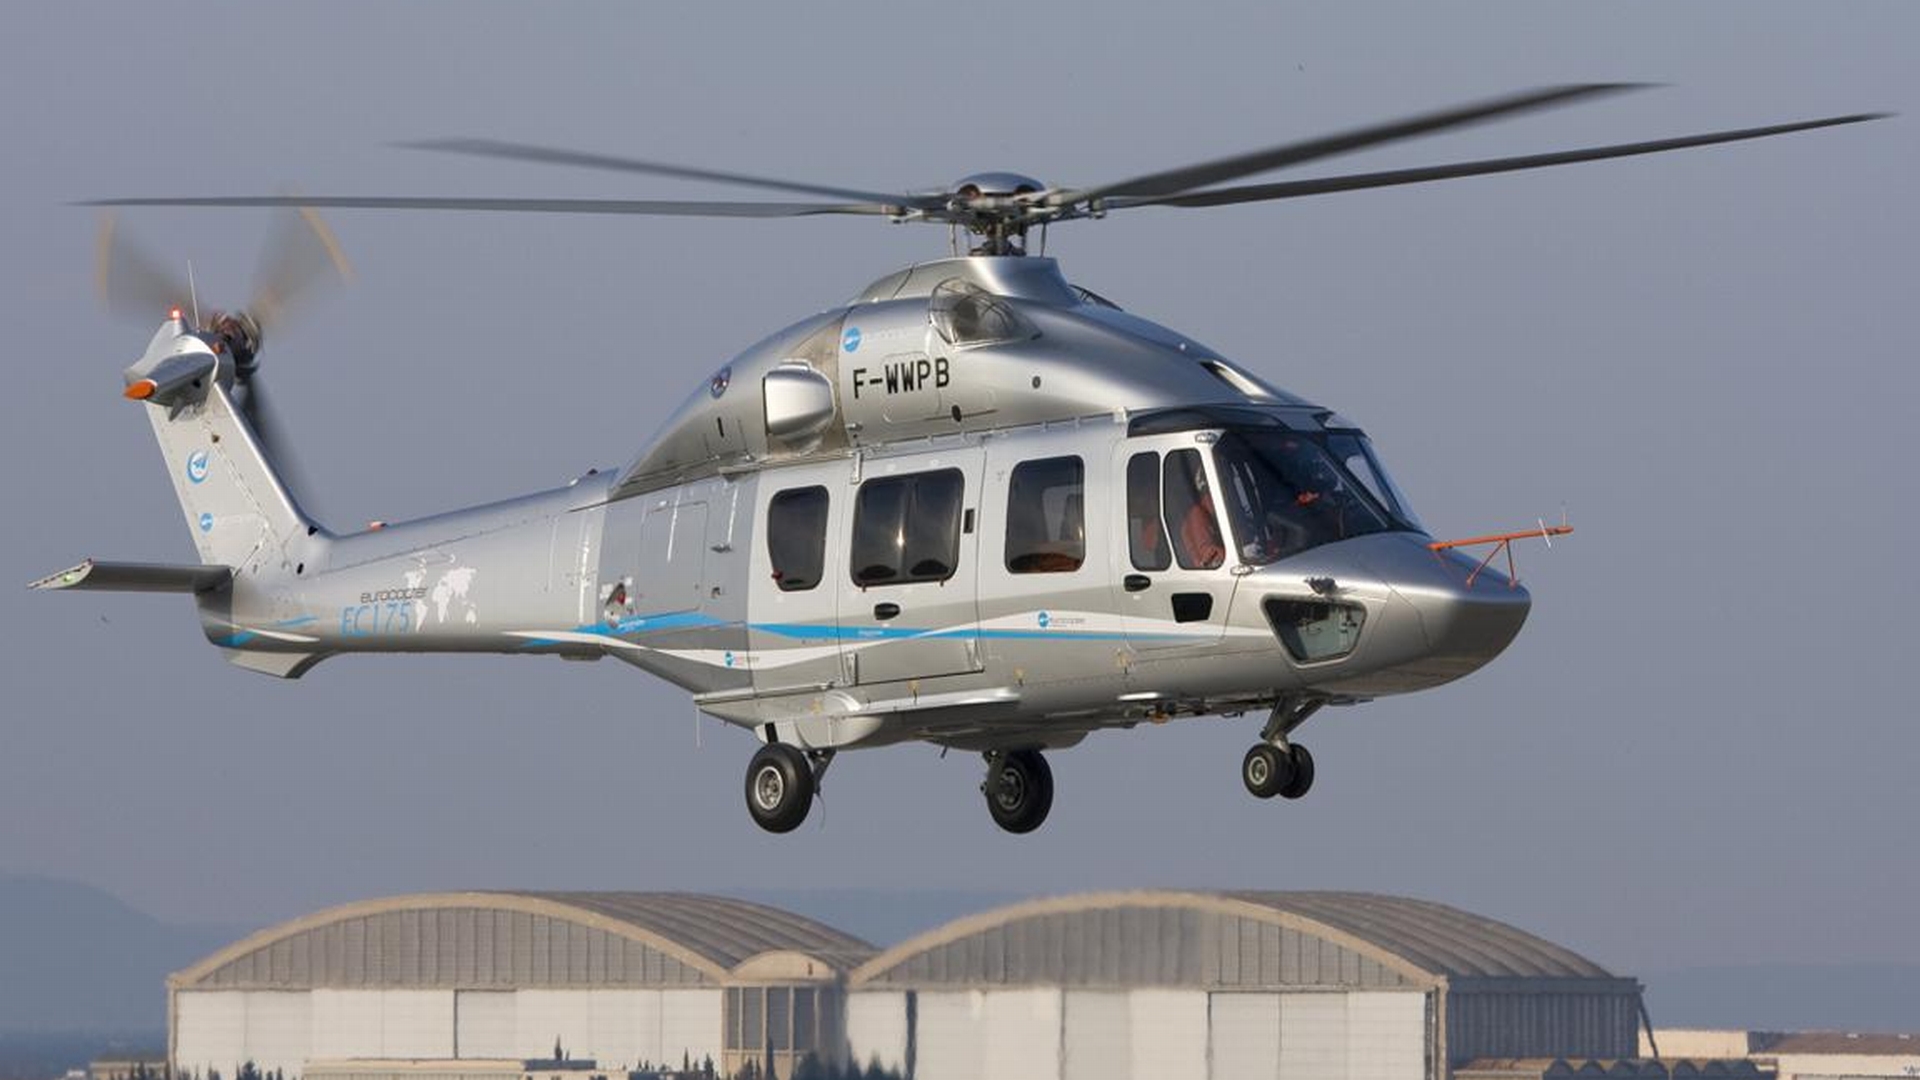 Vehicles Eurocopter HD Wallpaper | Background Image